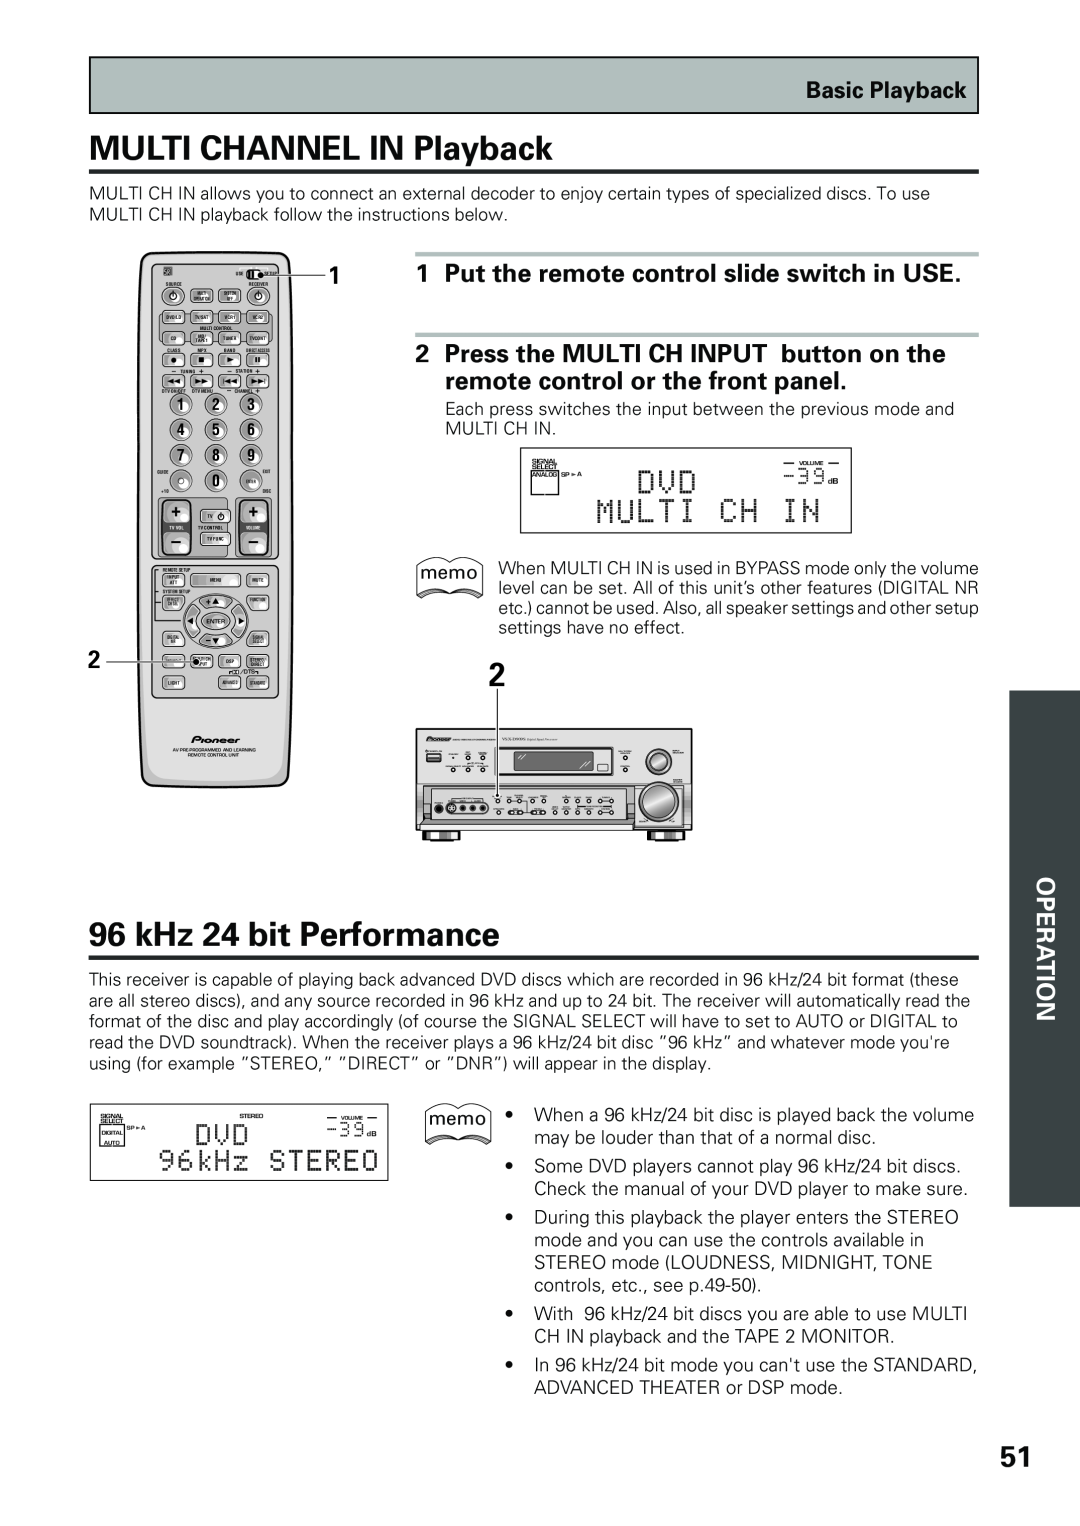 Pioneer VSX-D909S MULTI CHANNEL IN Playback, kHz 24 bit Performance, Put the remote control slide switch in USE, Operation 